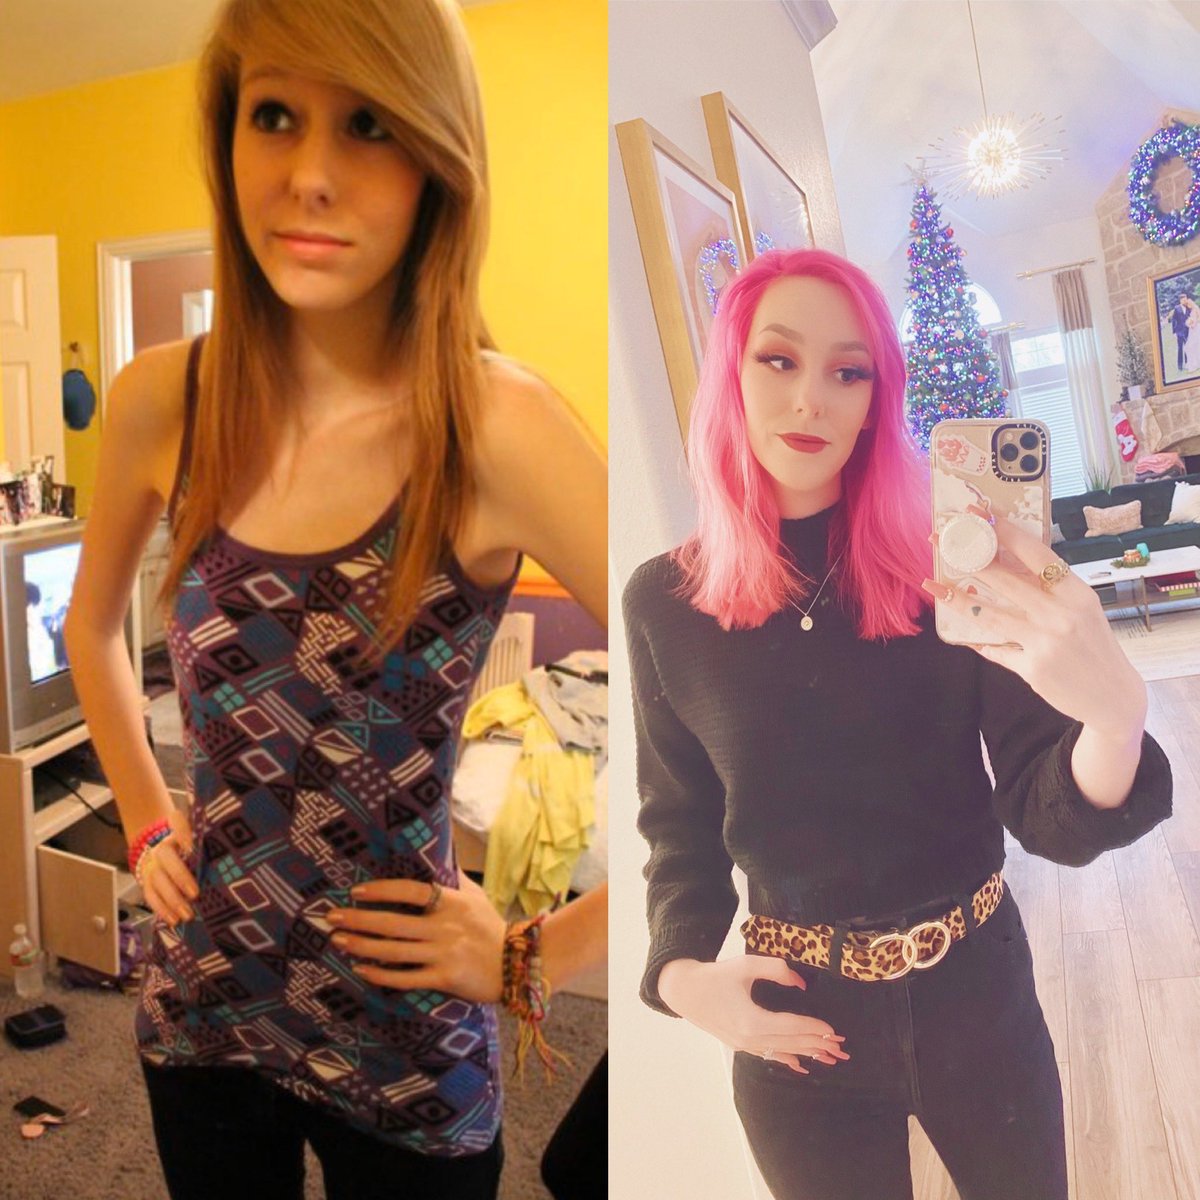 Meganplays On Twitter In 2009 I Was 95lbs And Thought I